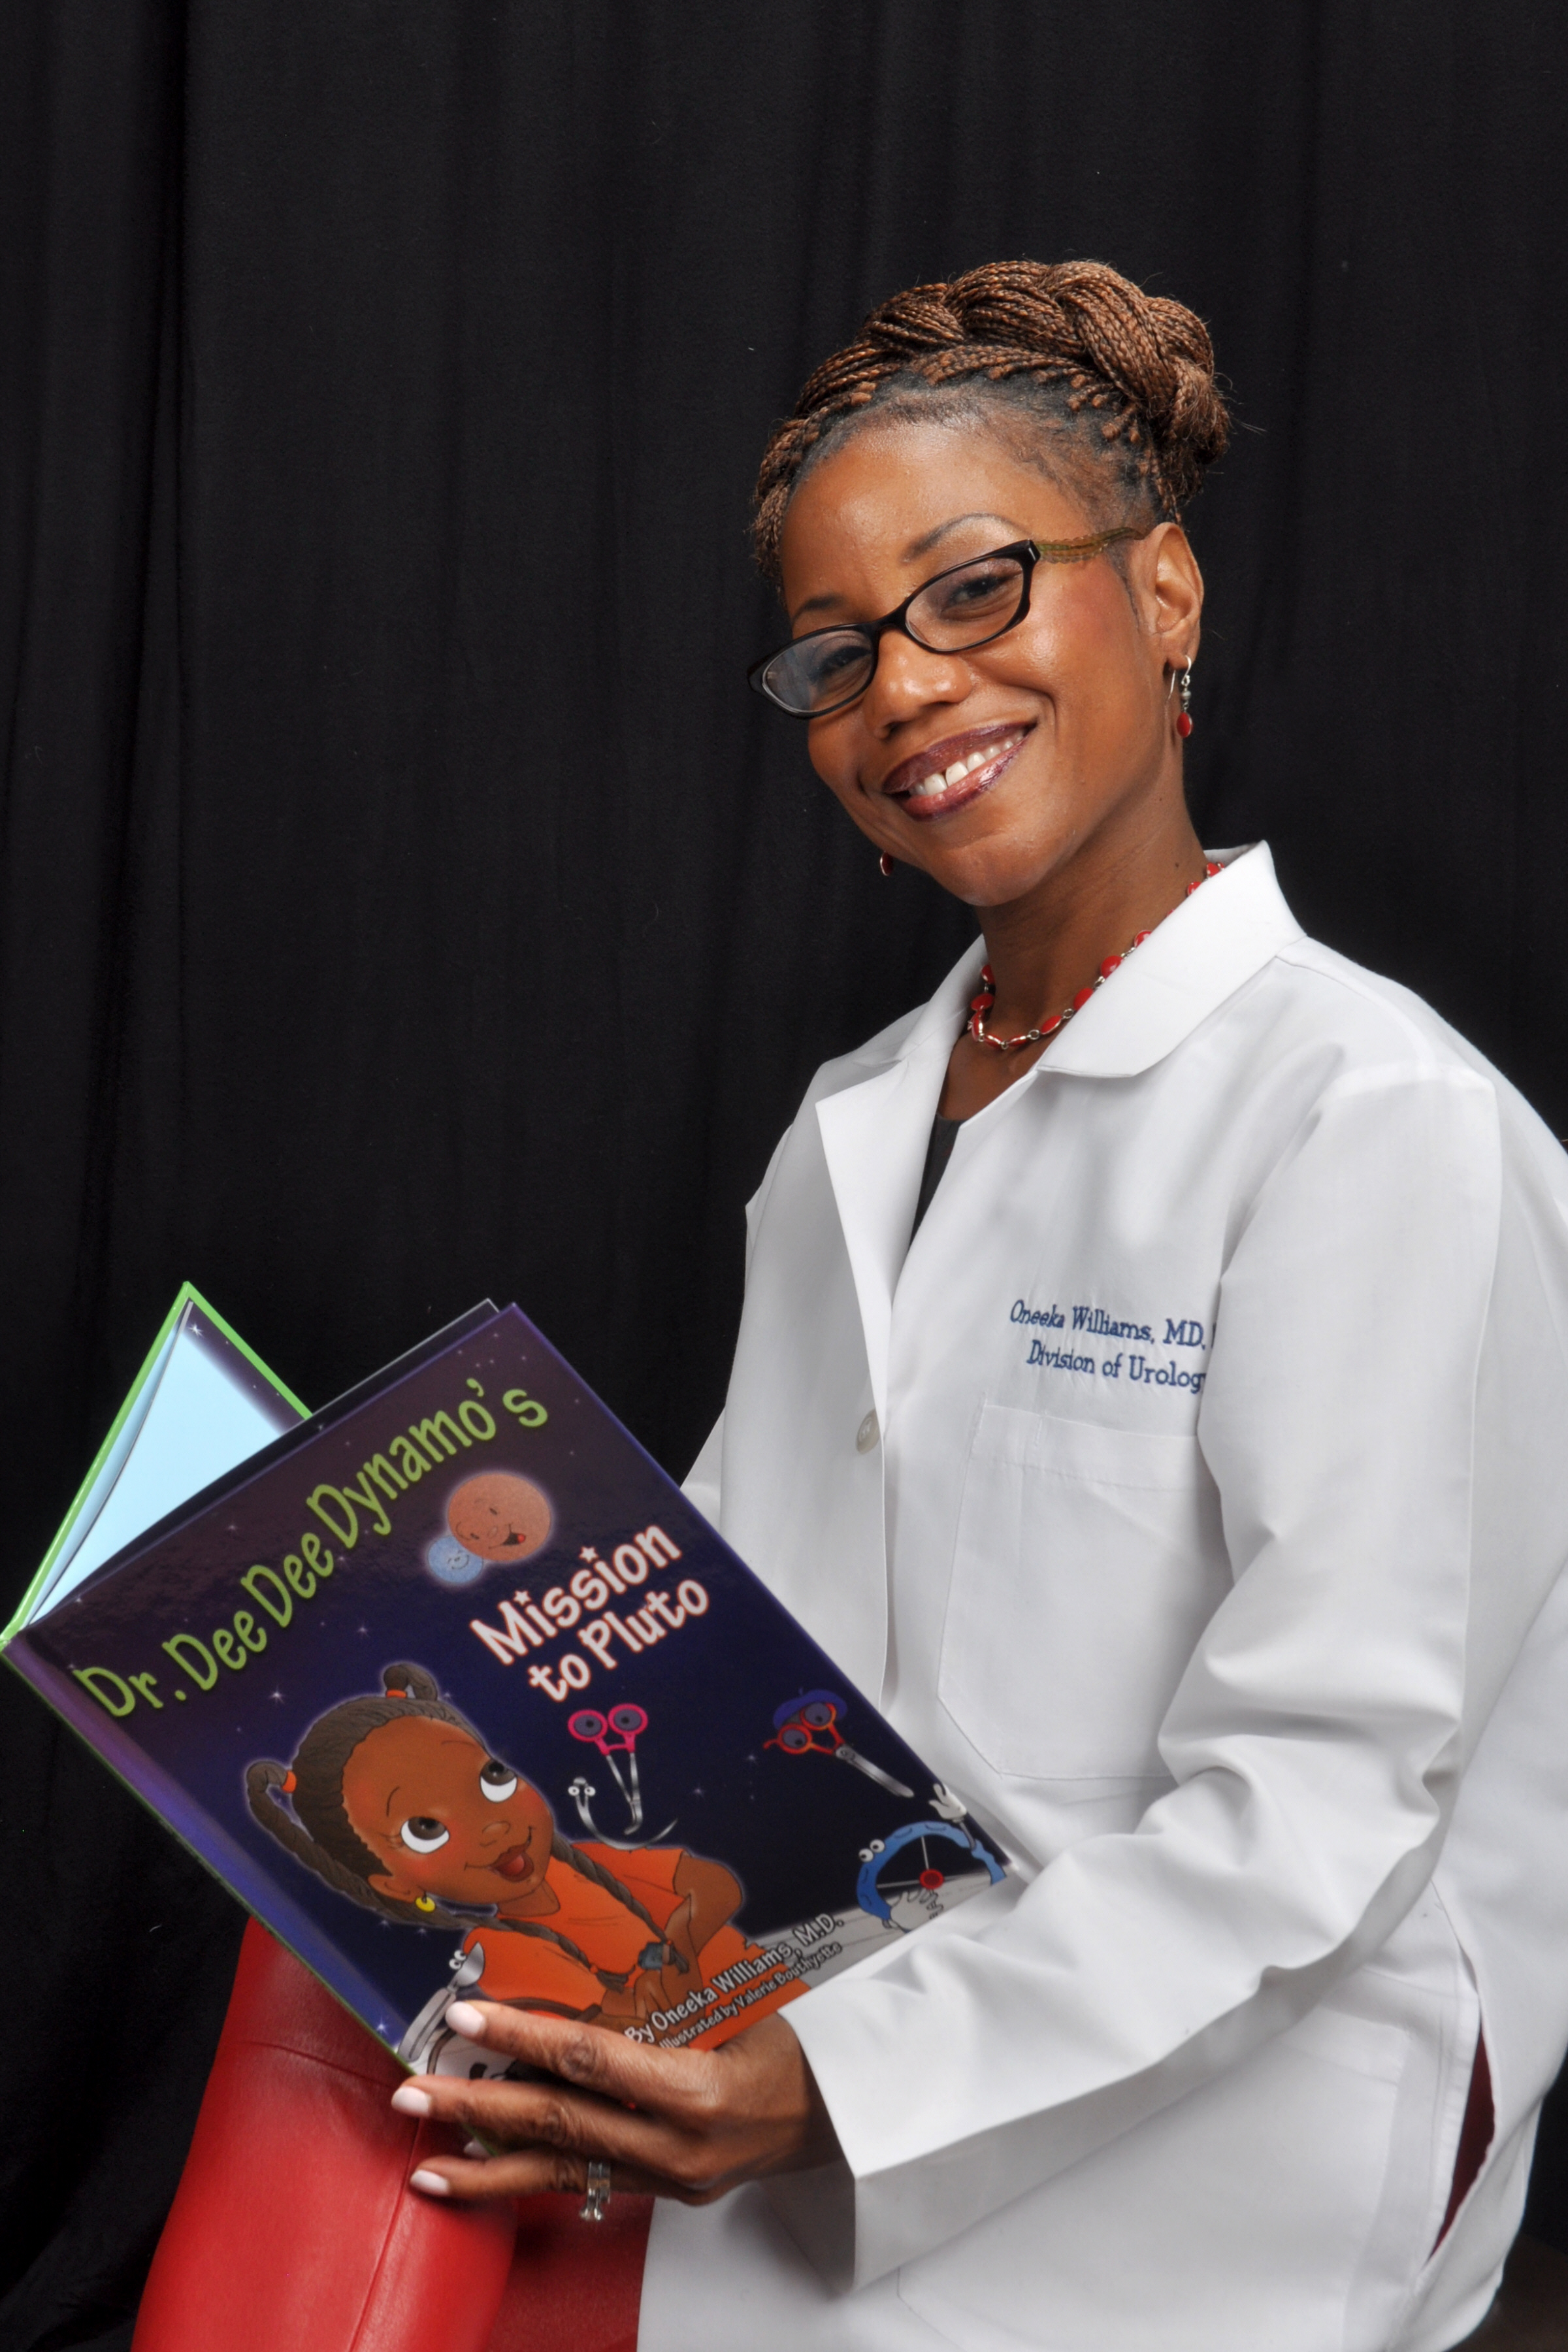 Dr. Oneeka Williams, urologic surgeon and author of the Dr. Dee Dee Dynamo book series.